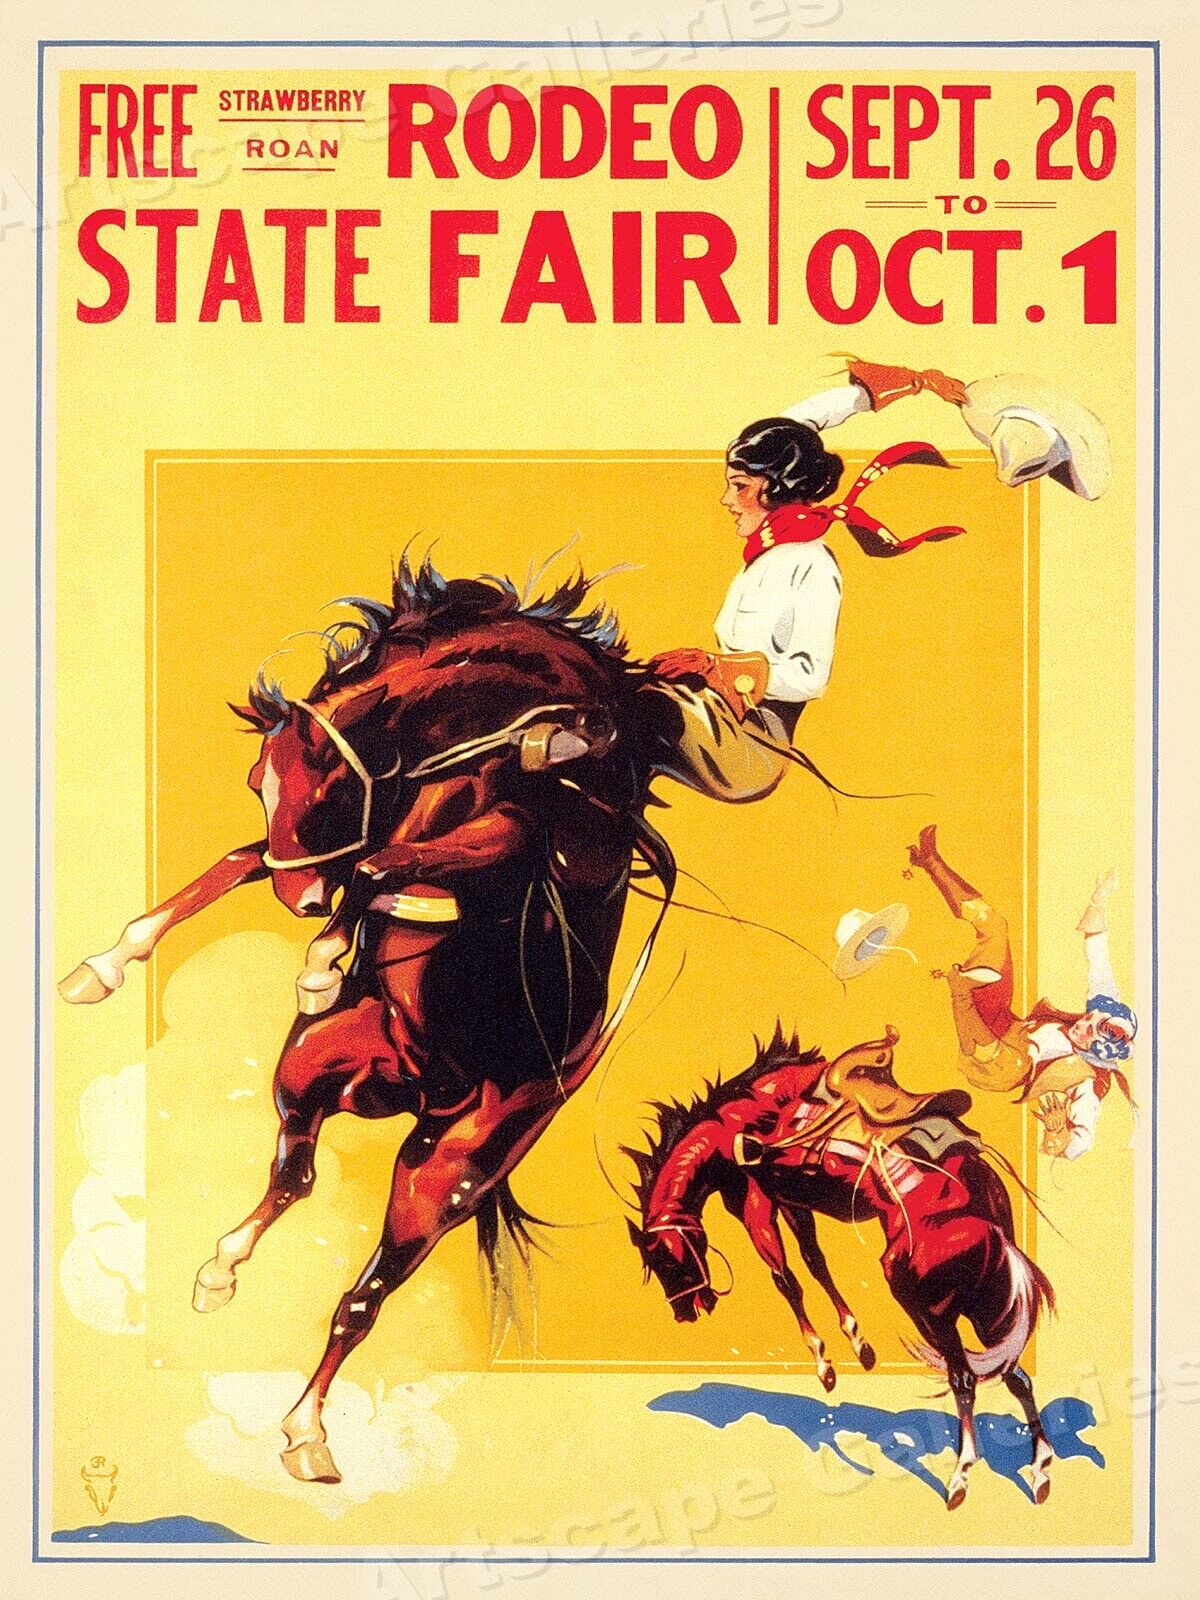 State Fair Rodeo 1930s Cowgirl Strawberry Roan Vintage Rodeo Poster - 18x24